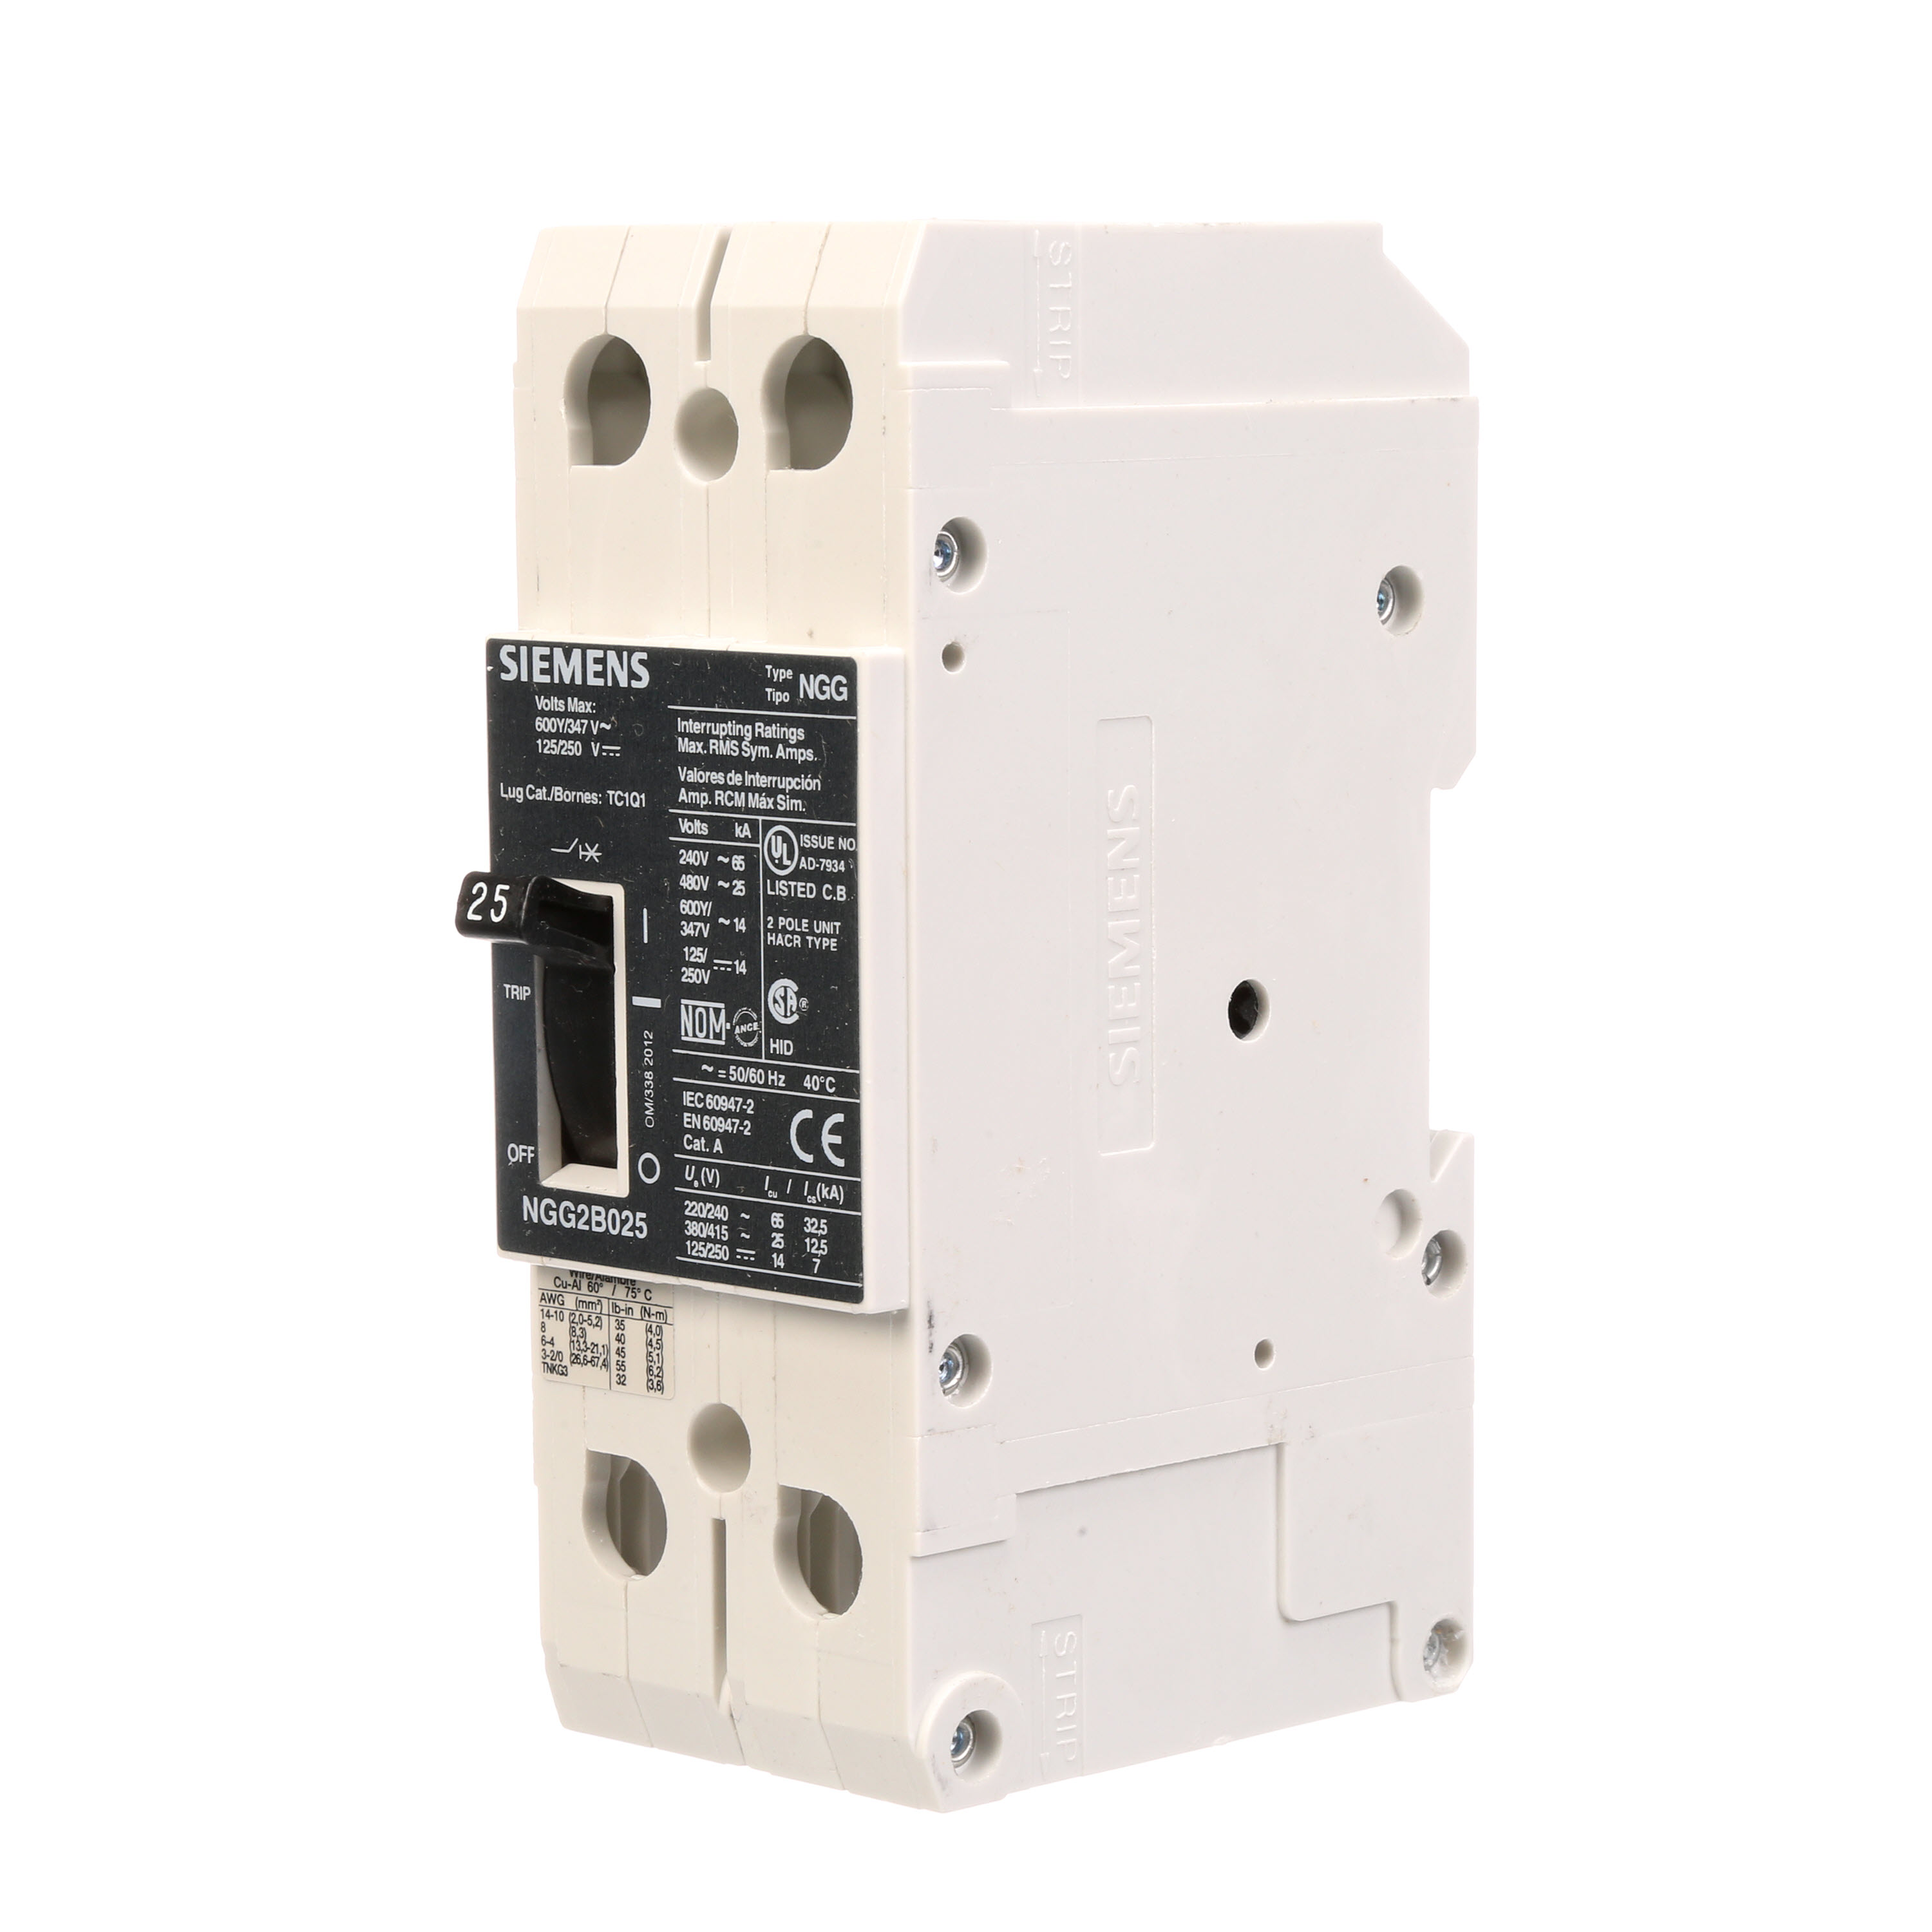 SIEMENS LOW VOLTAGE G FRAME CIRCUIT BREAKER WITH THERMAL - MAGNETIC TRIP. UL LISTED NGG FRAME WITH STANDARD BREAKING CAPACITY. 25A 2-POLE (14KAIC AT 600Y/347V)(25KAIC AT 480V). SPECIAL FEATURES MOUNTS ON DIN RAIL / SCREW, NO LUGS. DIMENSIONS (W x H x D) IN 2 x 5.4 x 2.8.